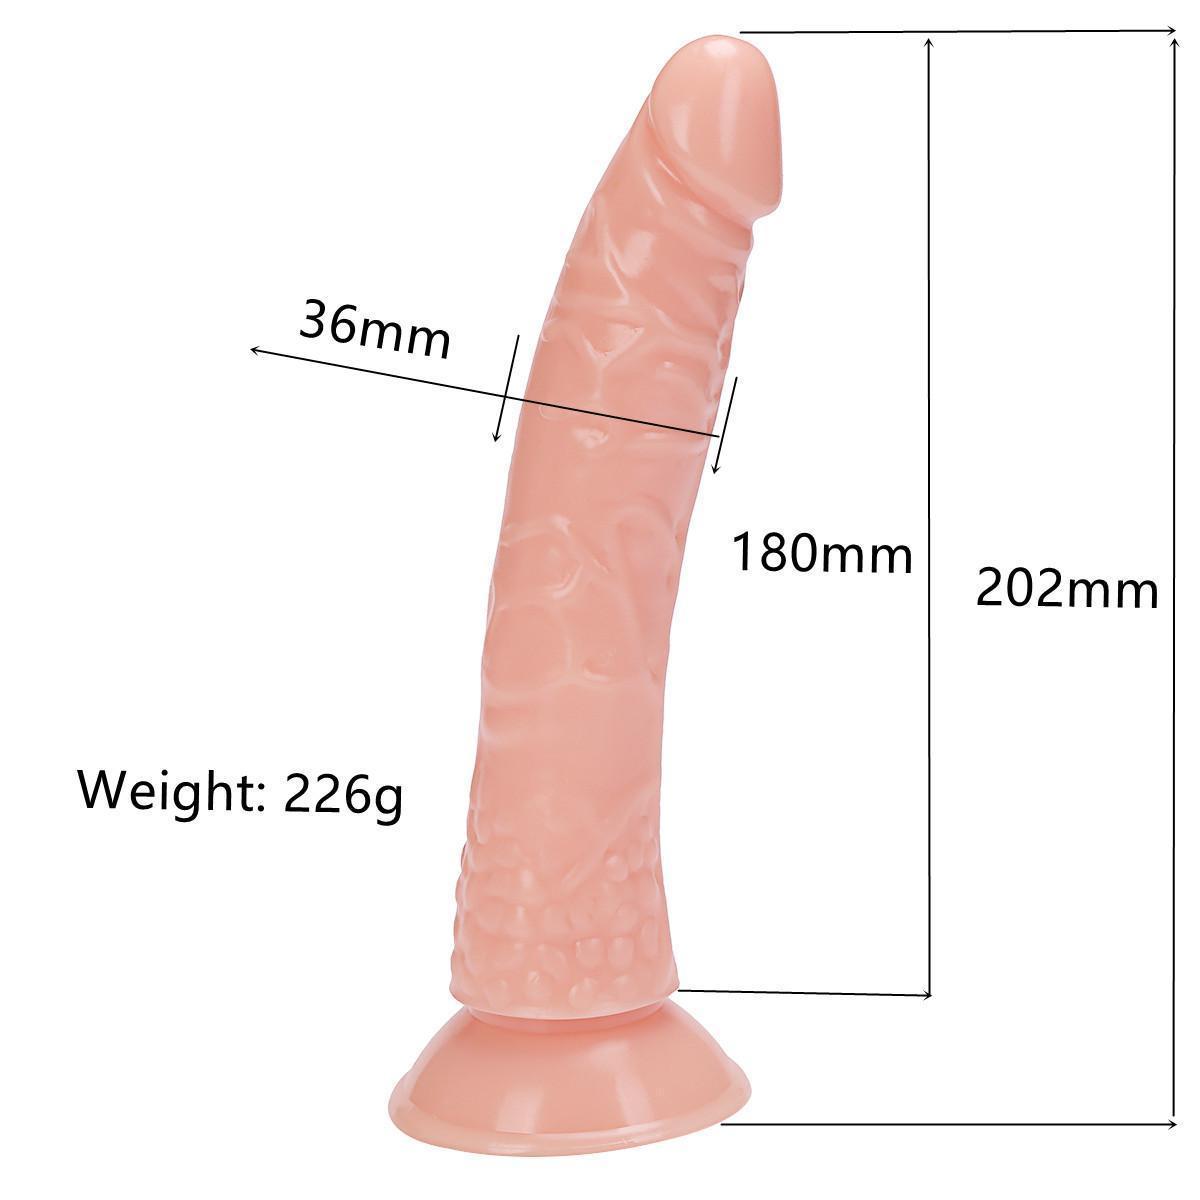 Multi color simulated penis for women